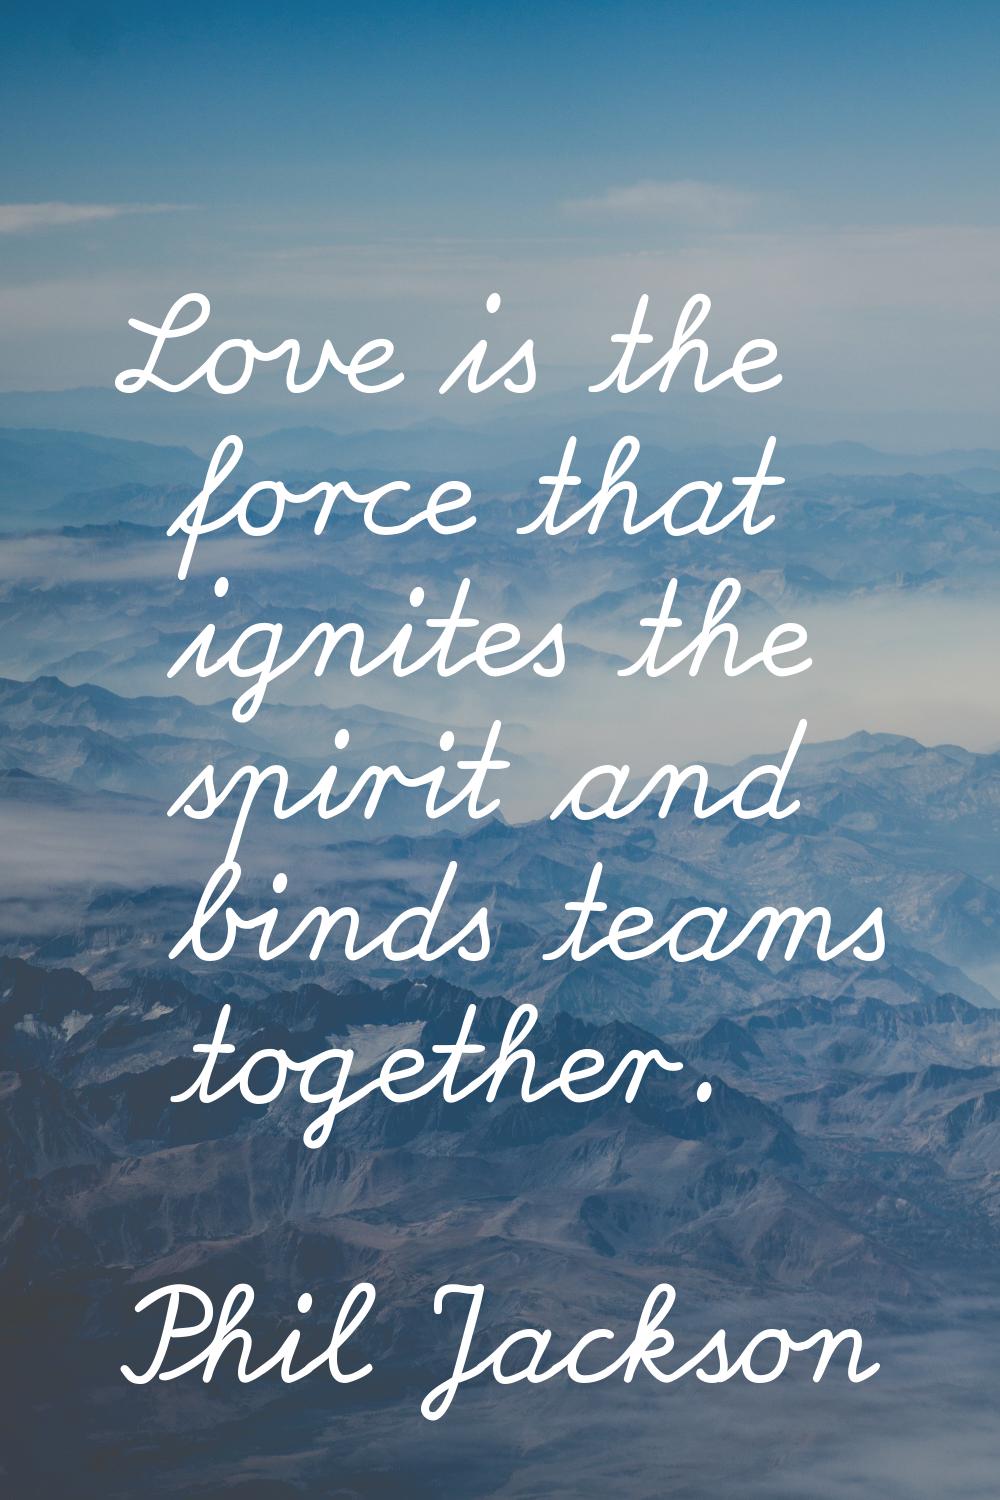 Love is the force that ignites the spirit and binds teams together.